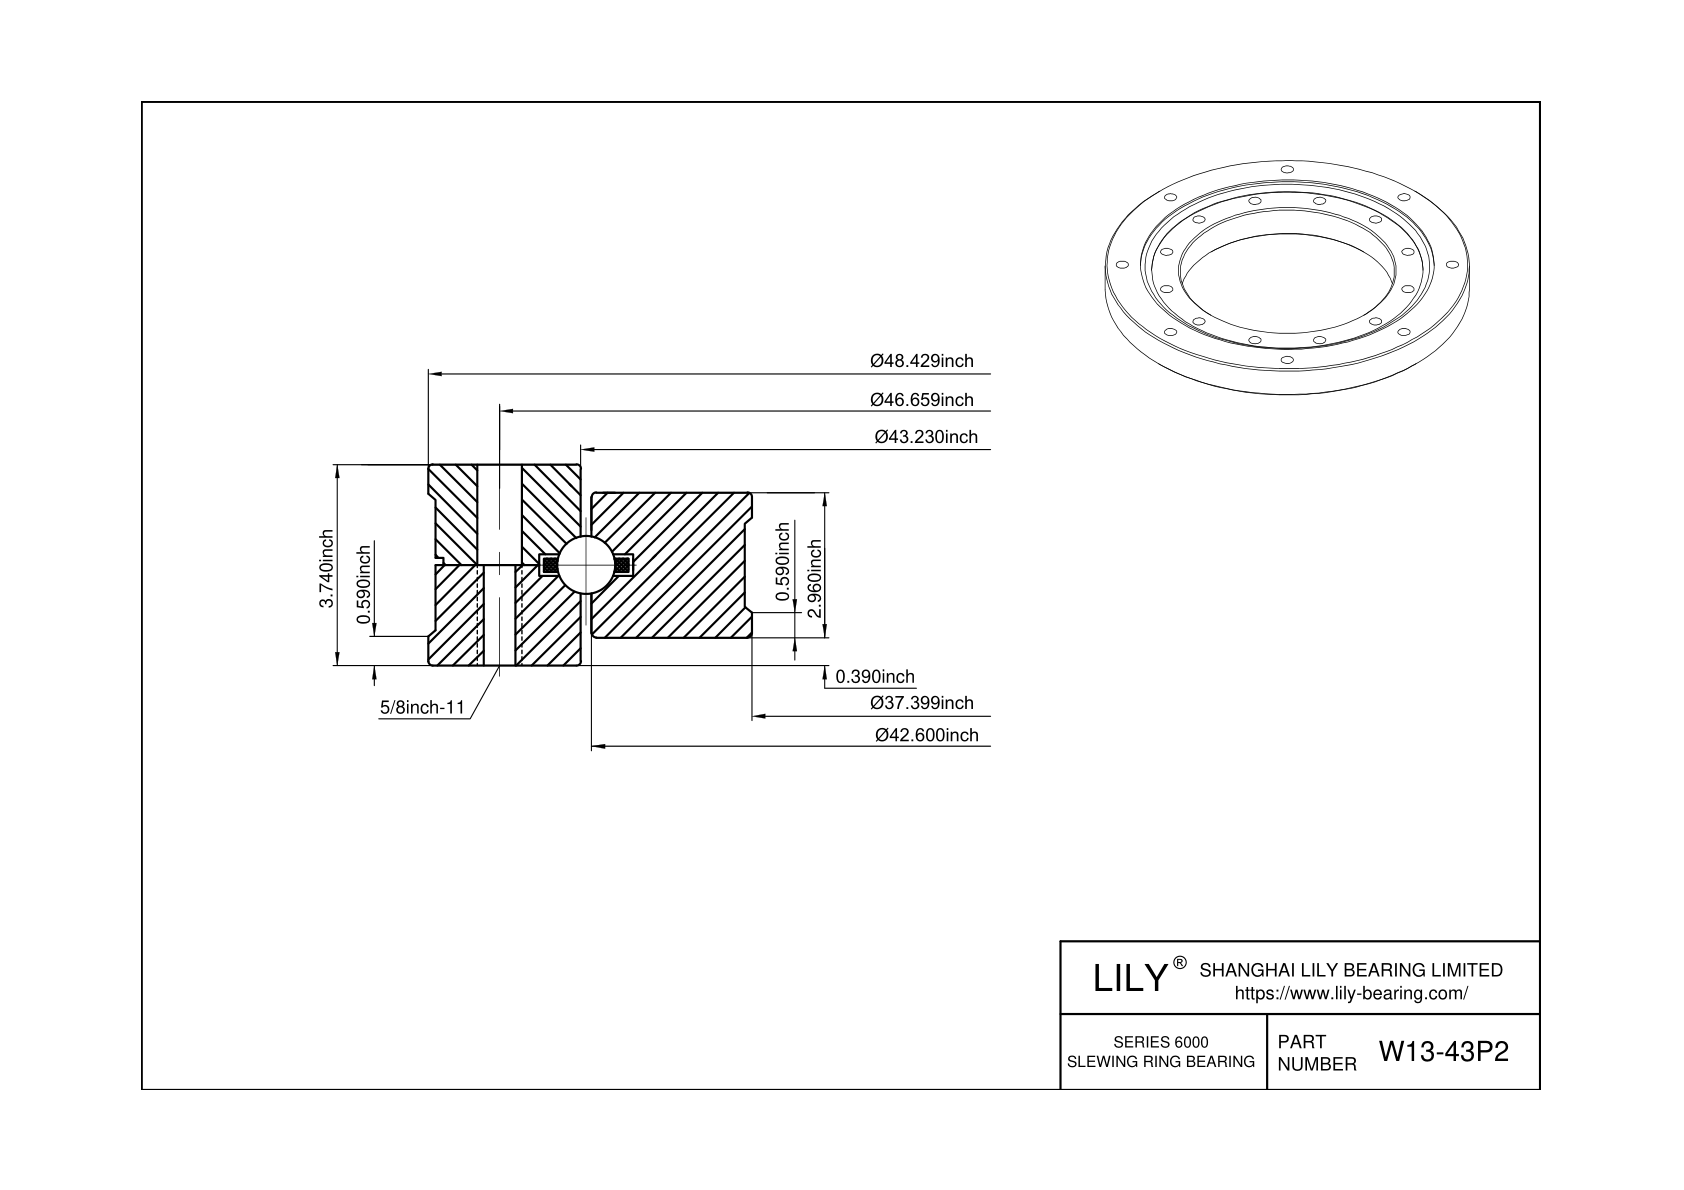 W13-43P2 6000 Series cad drawing